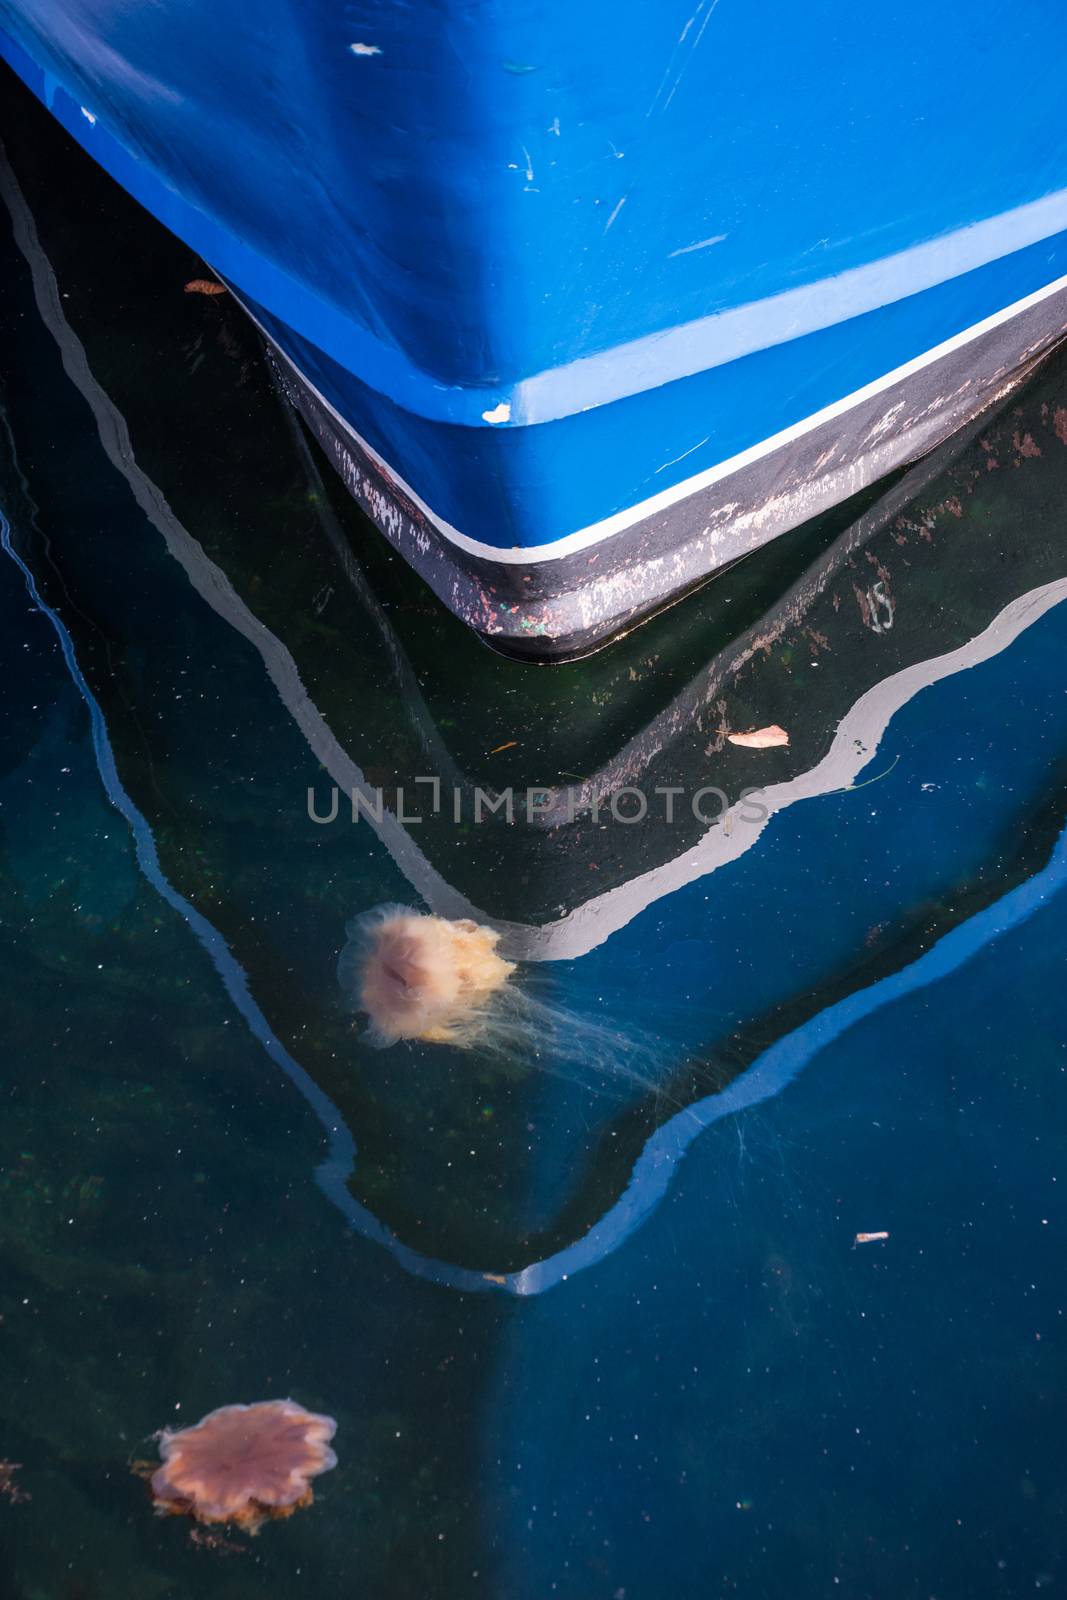 Jelly fish in front of blue boat